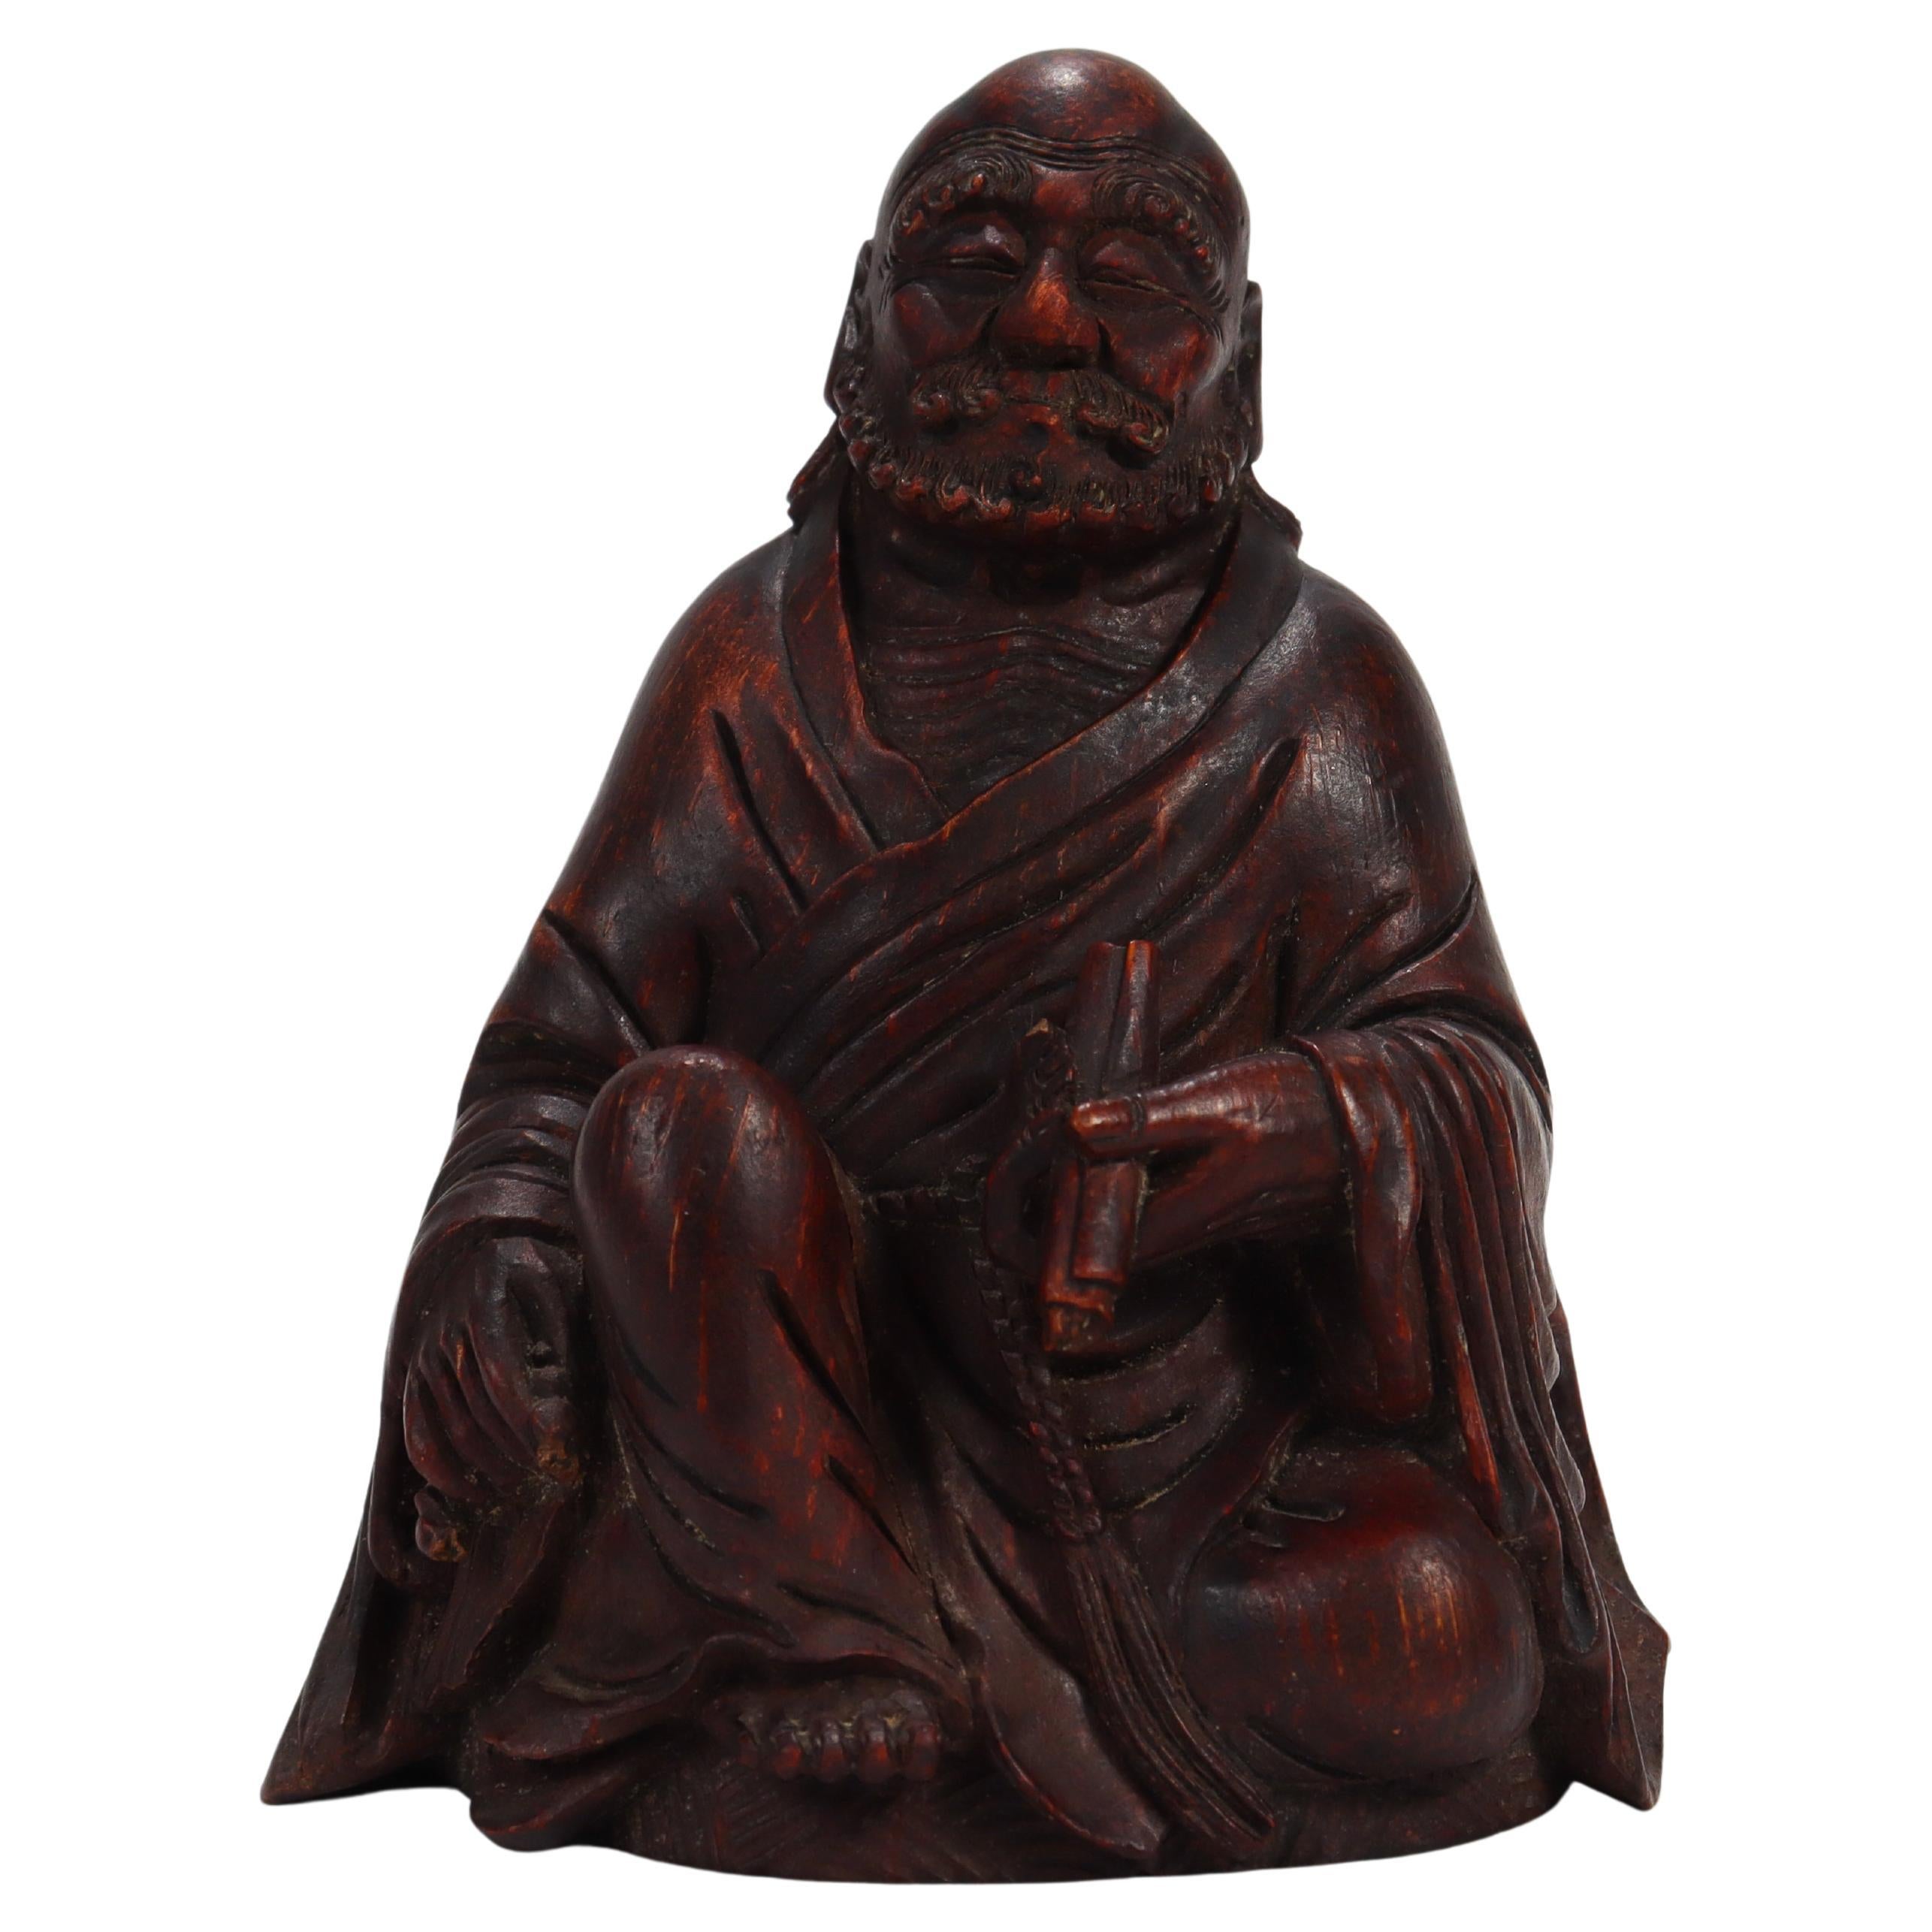 Old or Antique Japanese Wooden Figurine of a Buddhist Monk